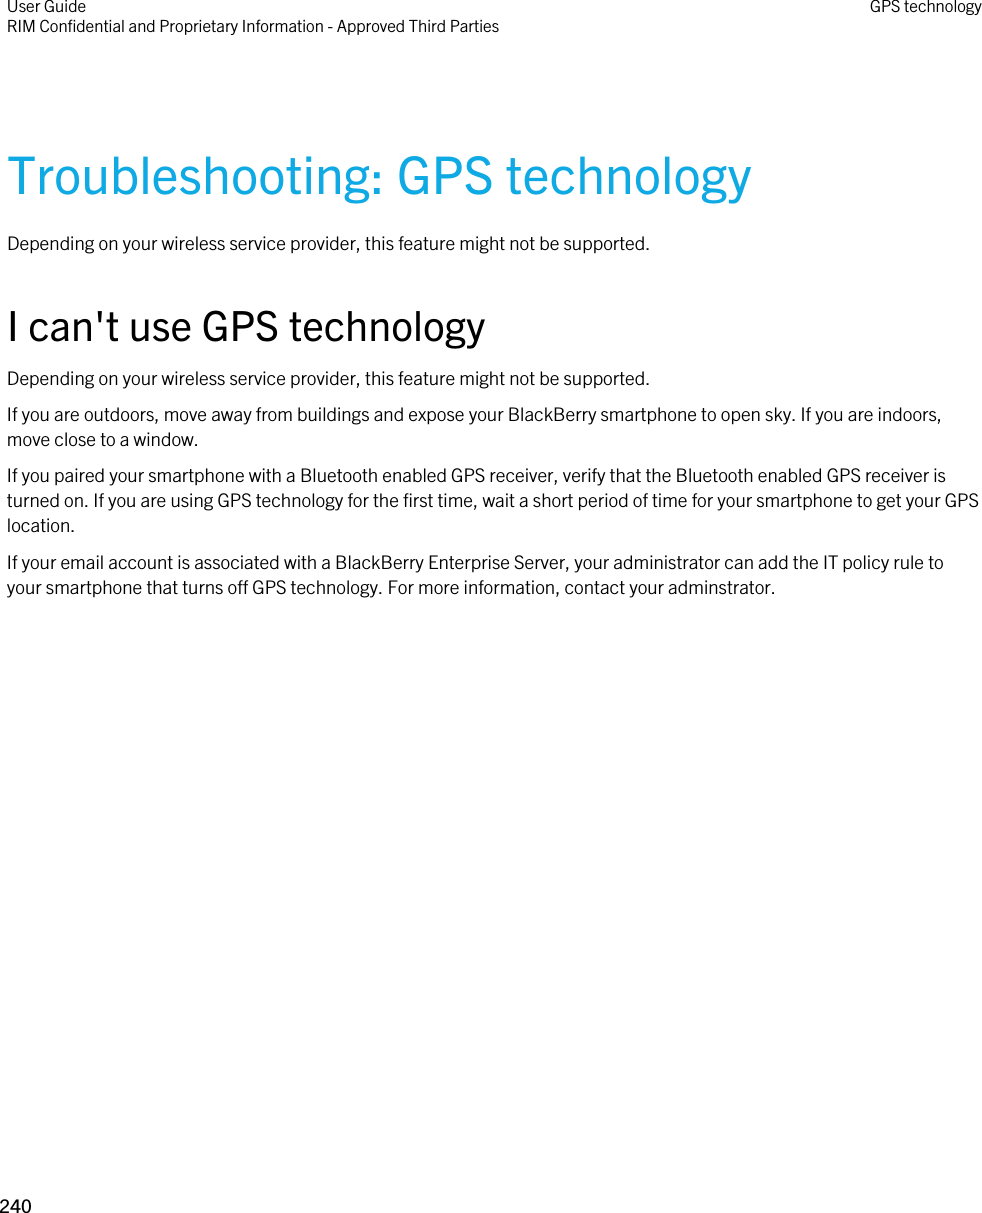 Troubleshooting: GPS technologyDepending on your wireless service provider, this feature might not be supported. I can&apos;t use GPS technologyDepending on your wireless service provider, this feature might not be supported. If you are outdoors, move away from buildings and expose your BlackBerry smartphone to open sky. If you are indoors, move close to a window.If you paired your smartphone with a Bluetooth enabled GPS receiver, verify that the Bluetooth enabled GPS receiver is turned on. If you are using GPS technology for the first time, wait a short period of time for your smartphone to get your GPS location.If your email account is associated with a BlackBerry Enterprise Server, your administrator can add the IT policy rule to your smartphone that turns off GPS technology. For more information, contact your adminstrator.User GuideRIM Confidential and Proprietary Information - Approved Third Parties GPS technology240 